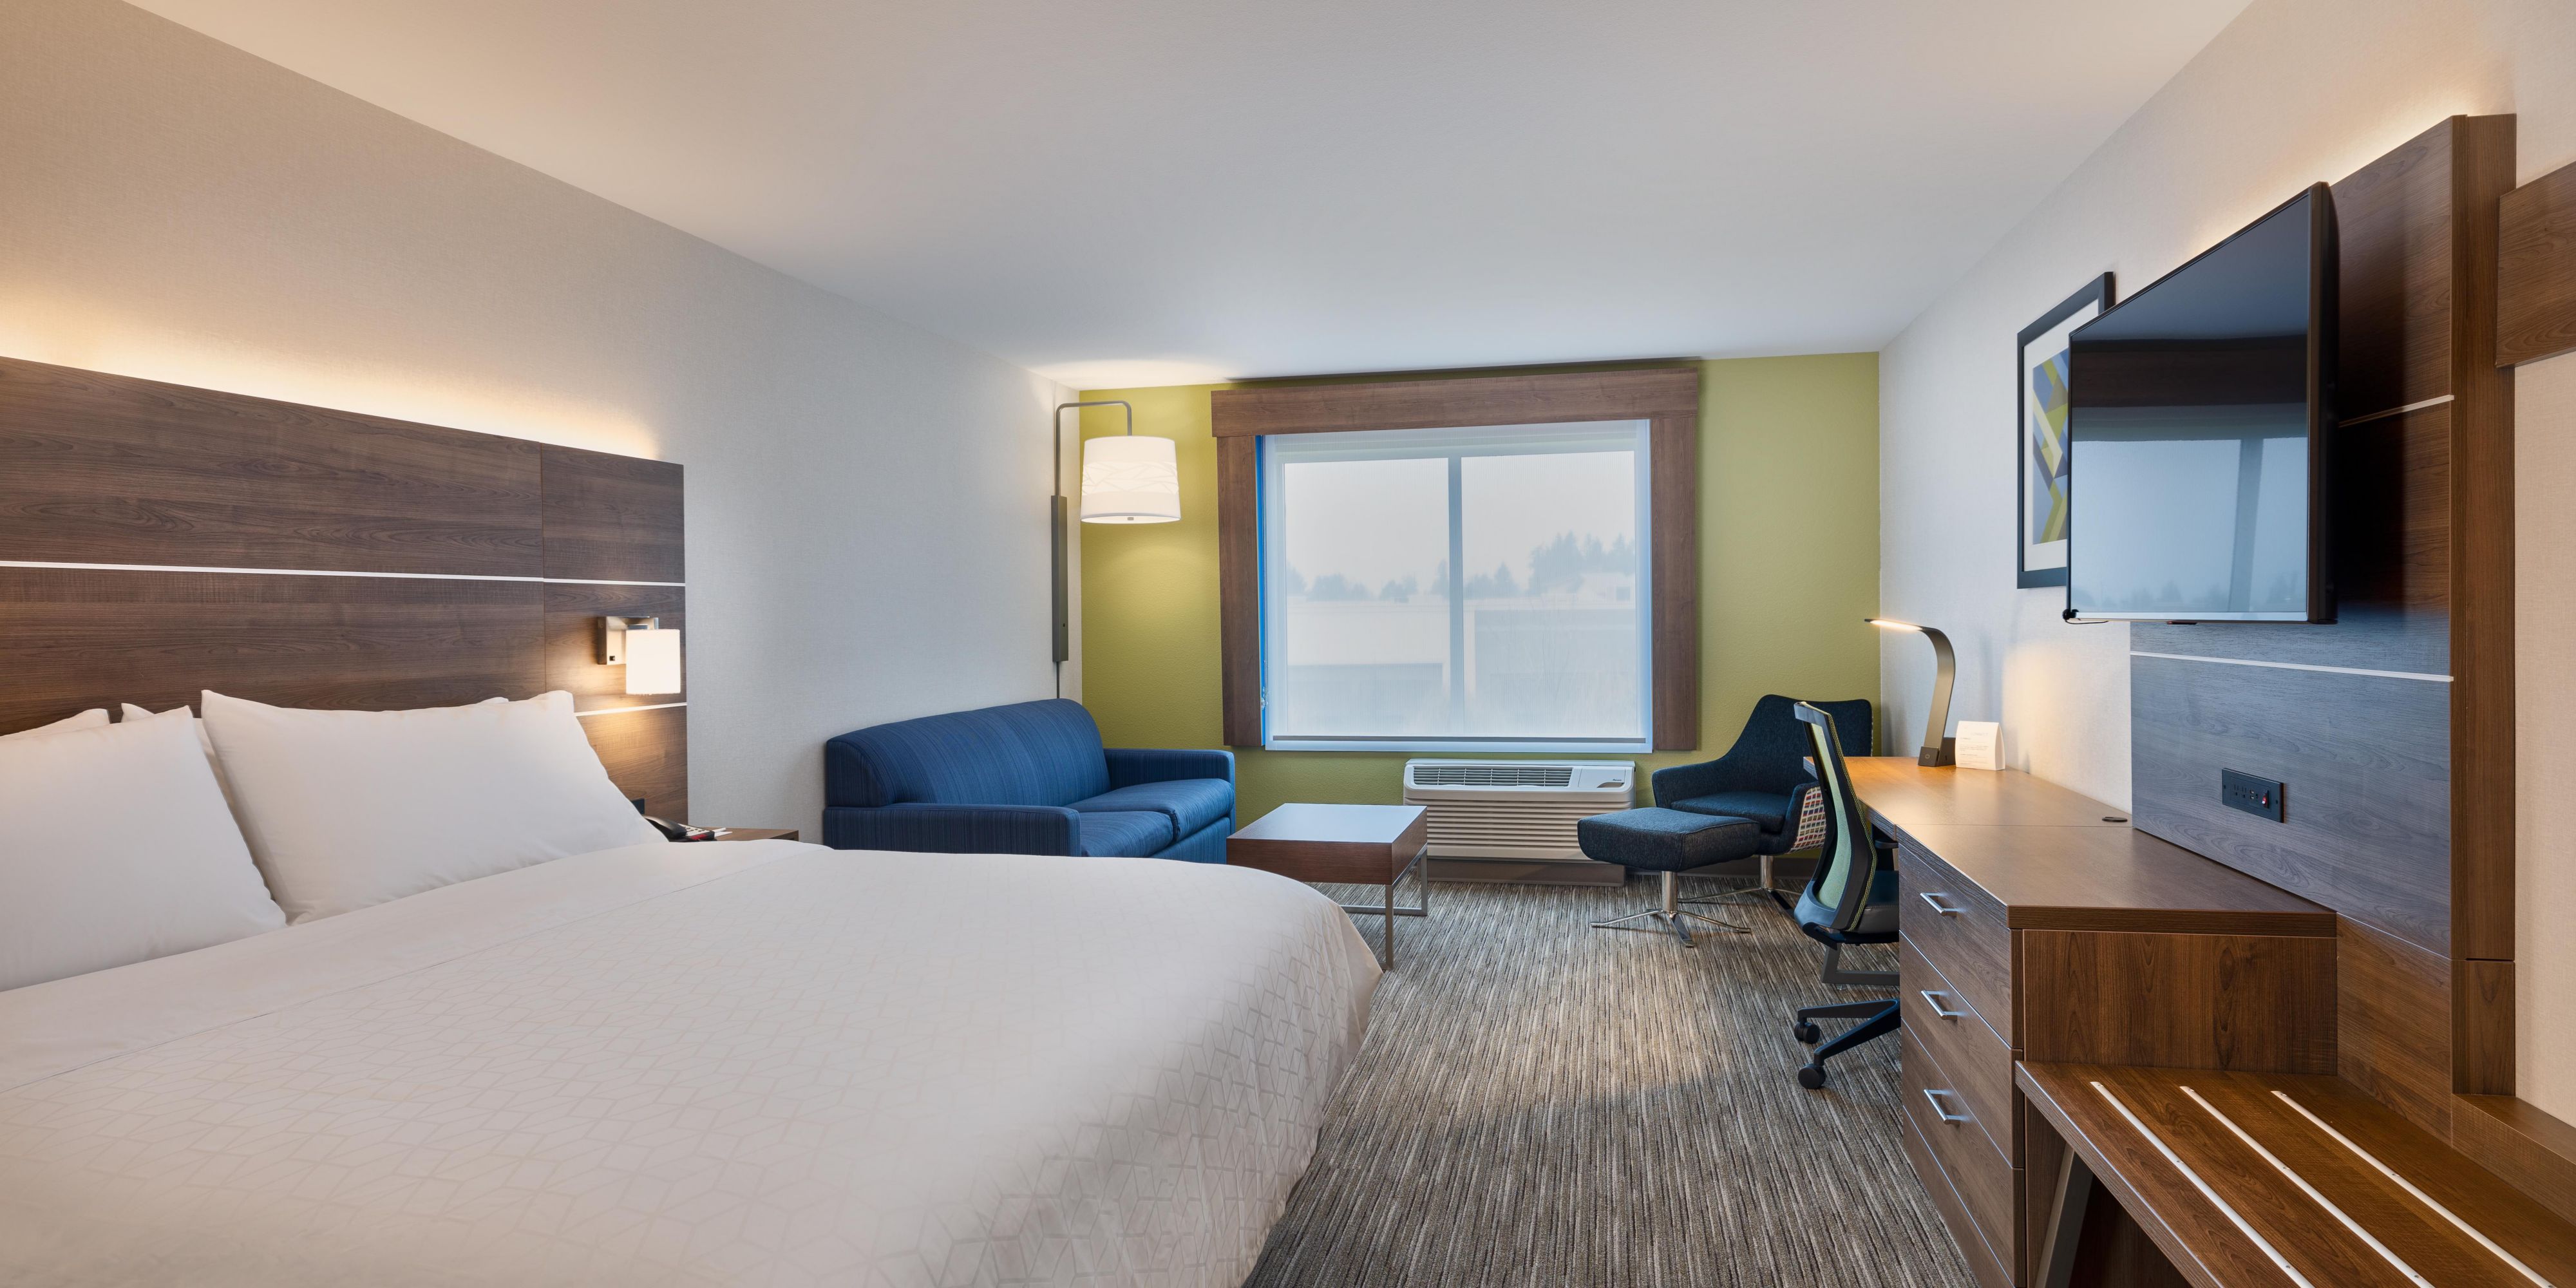 We offer several King Suites that include a living area with a pullout sofa bed. Great for families or individual travelers just looking for a little more room!